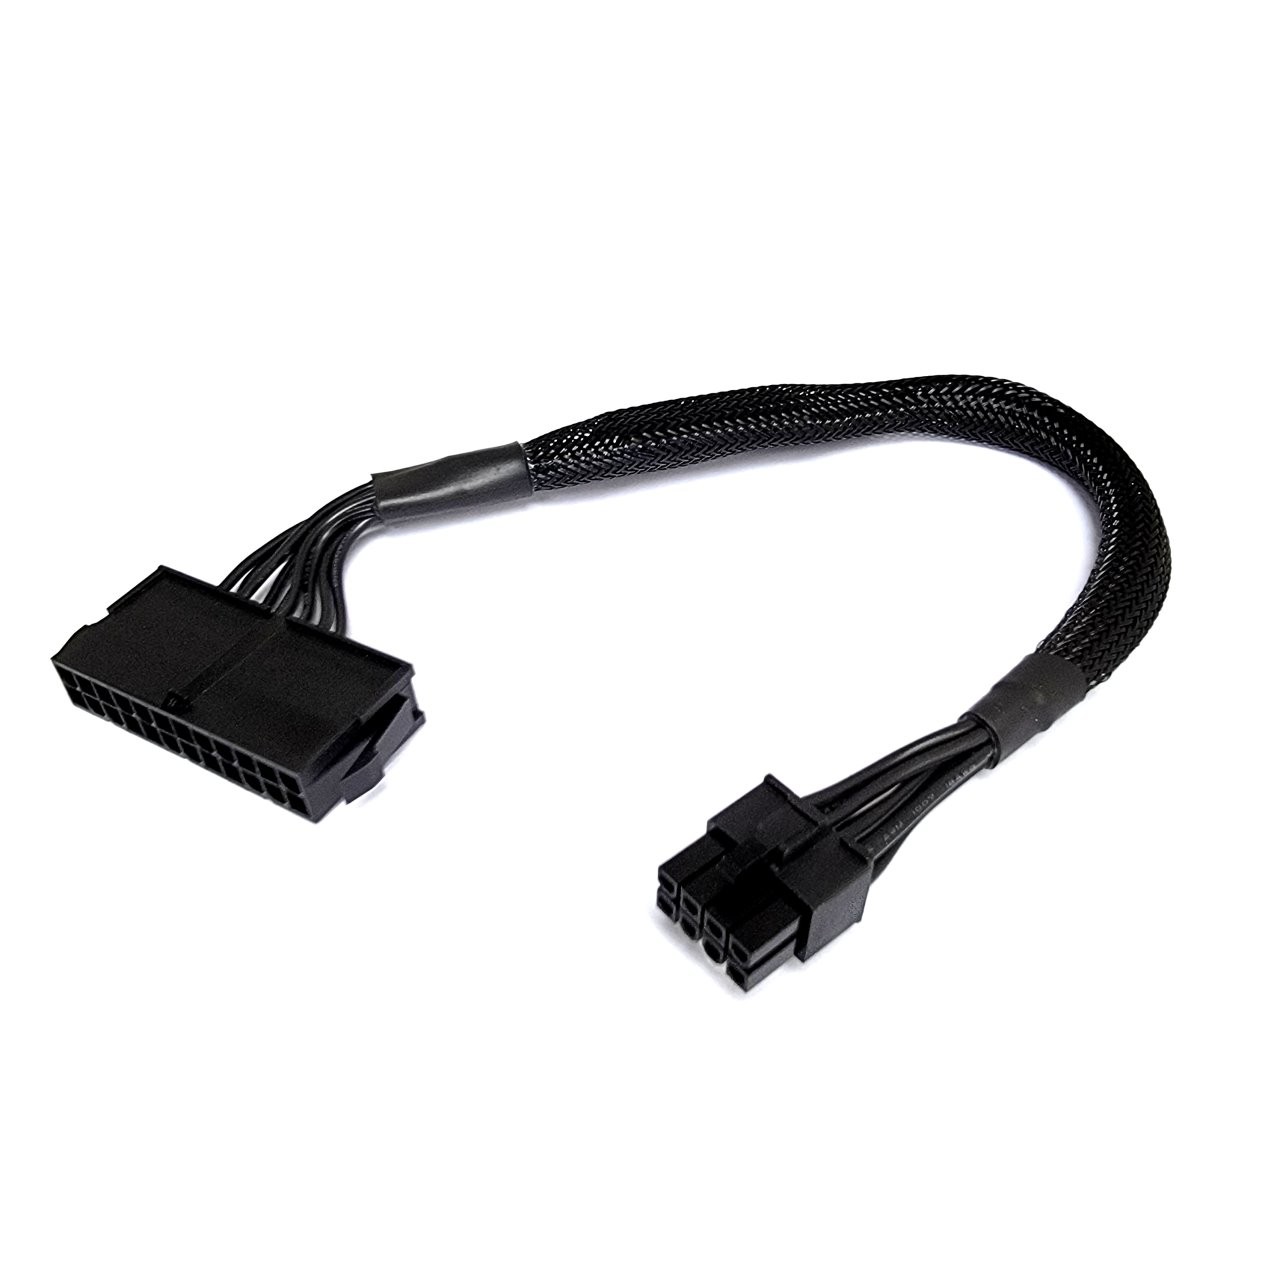 Dell Inspiron 3650 PSU Main Power 24 Pin to 8 Pin Adapter Cable 30cm